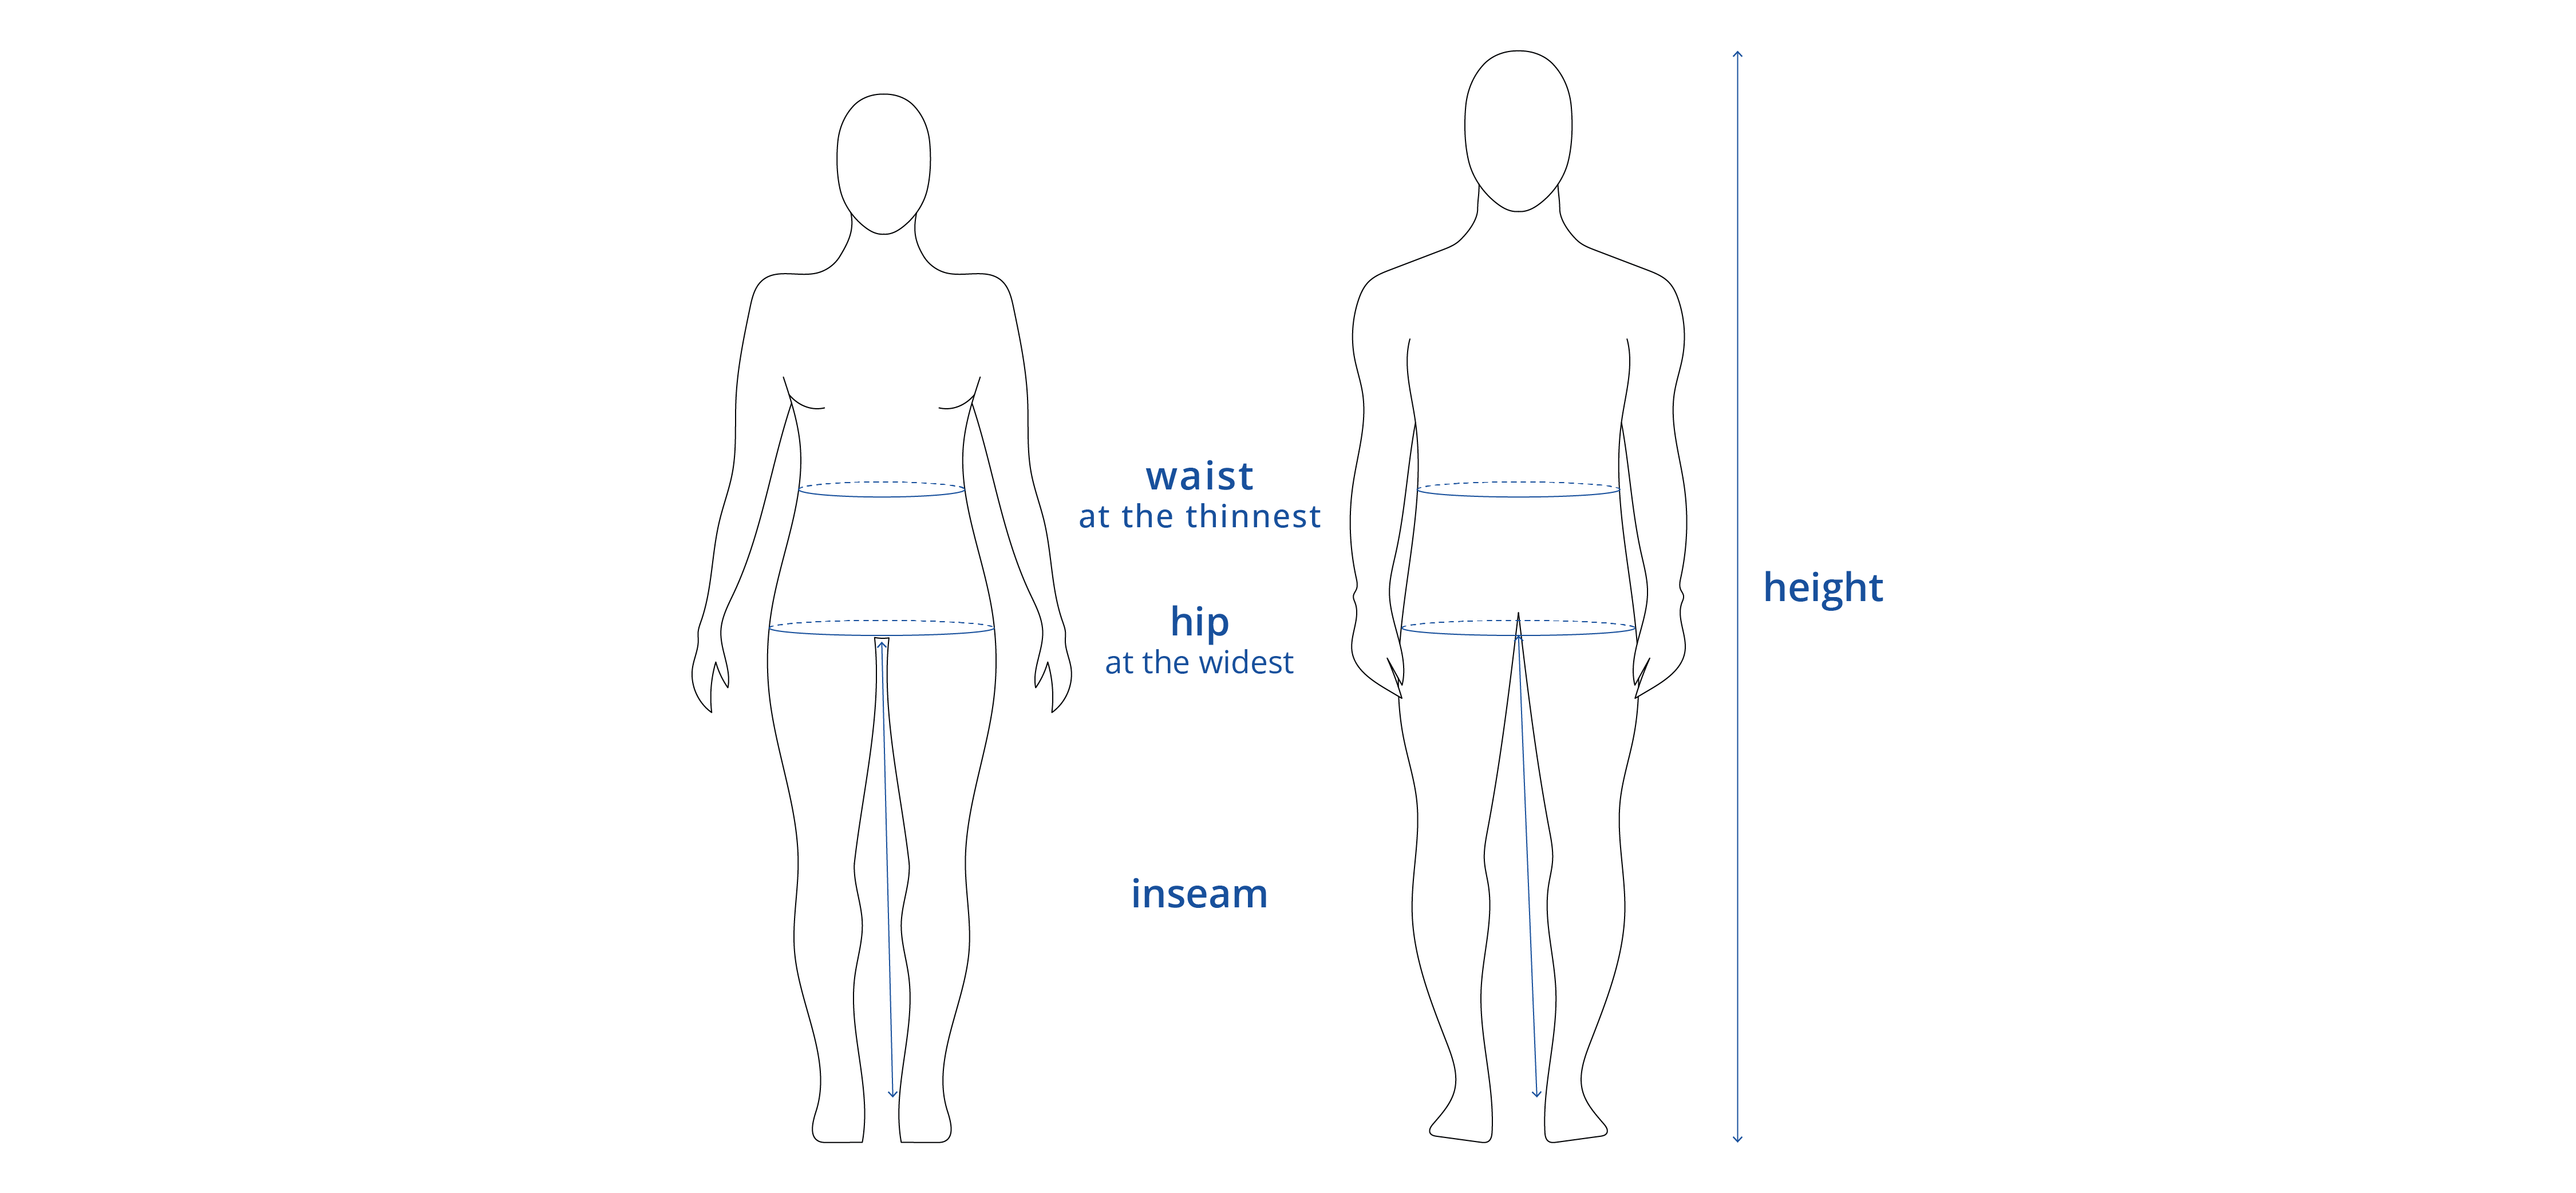 measuring height, waist, hip and inseam lengths